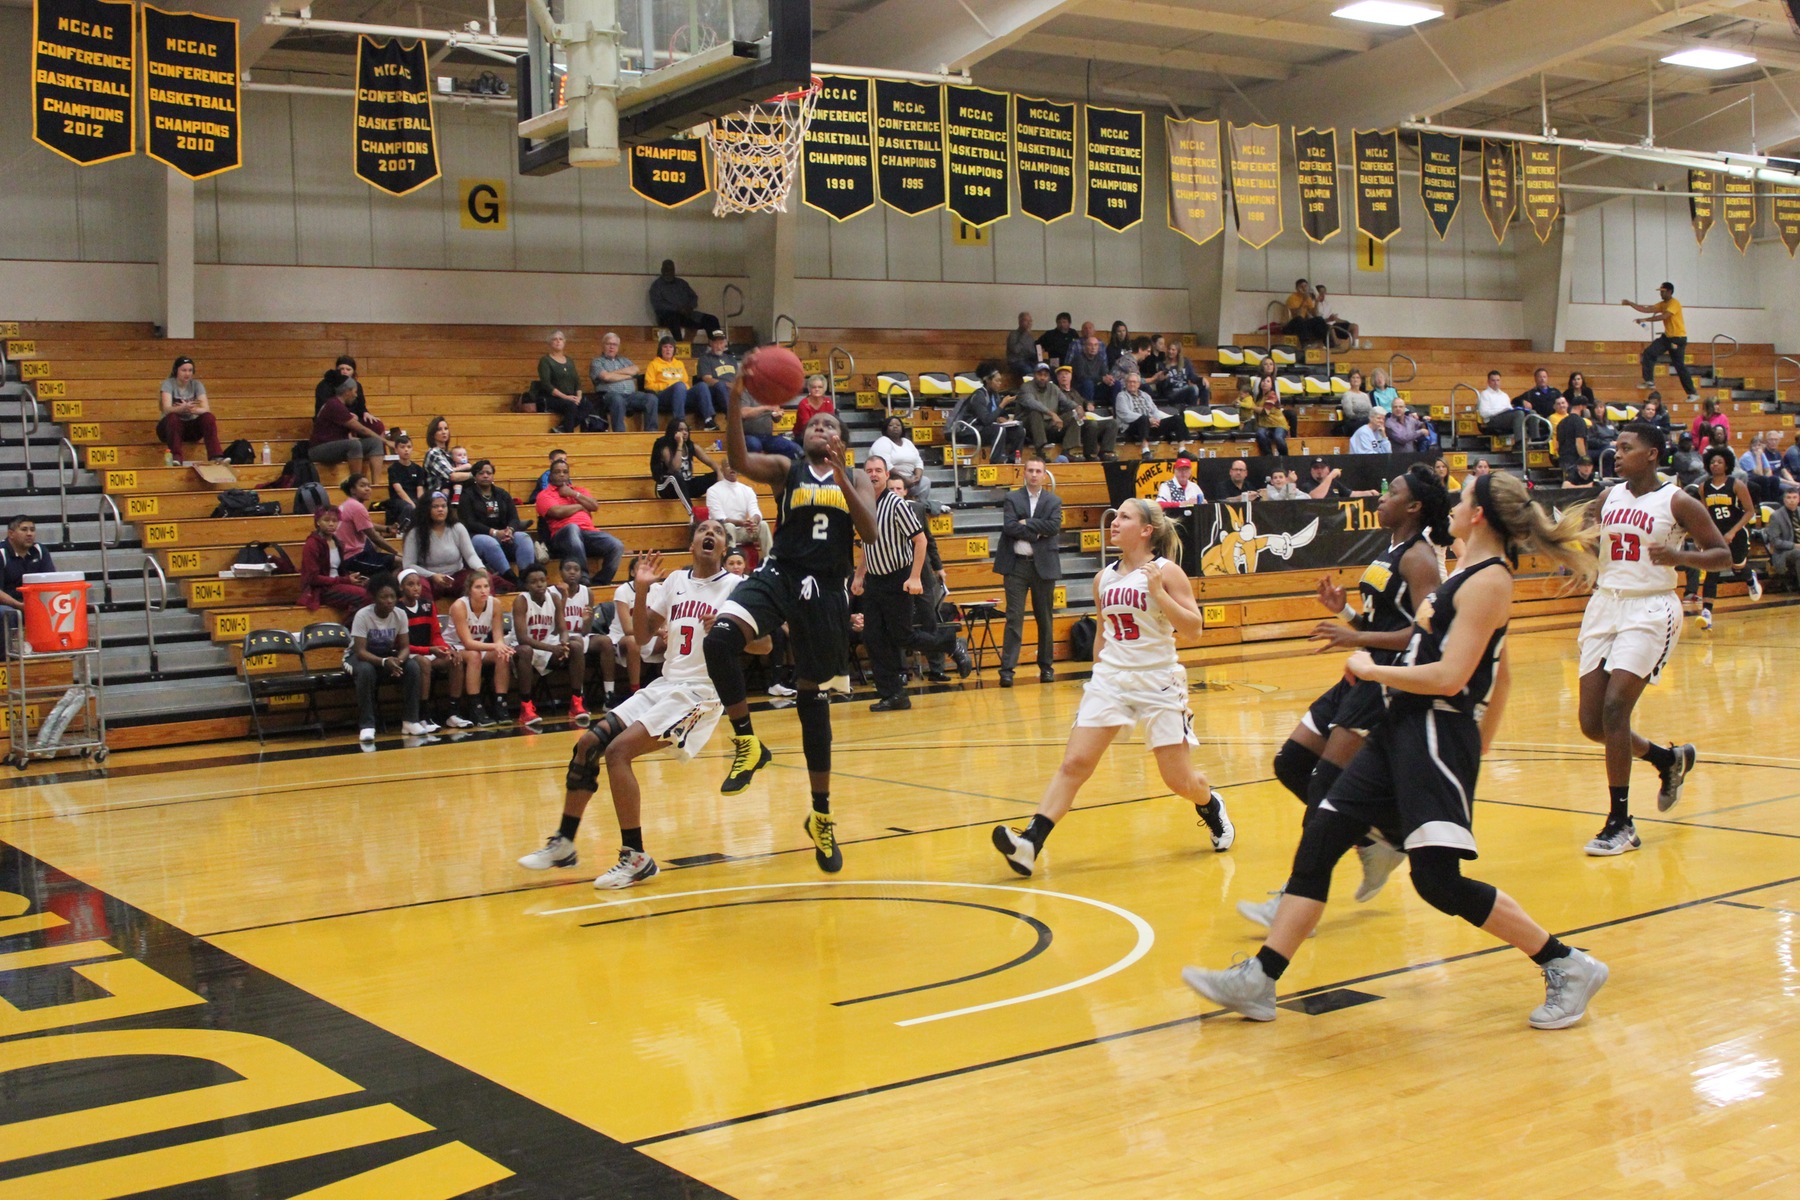 Lady Raiders come up short against Wabash Valley again